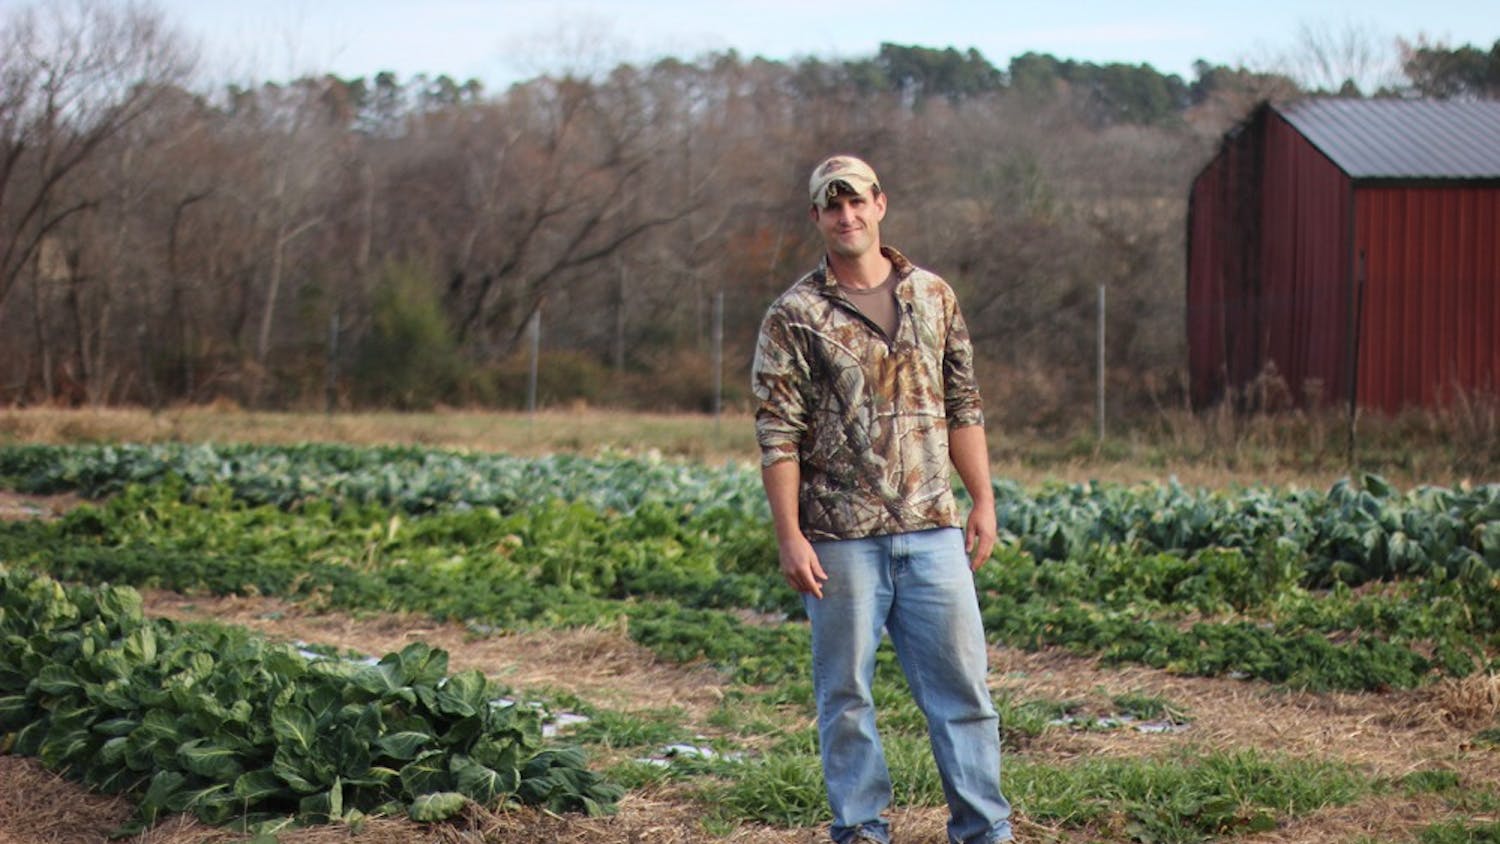 Jonathan Ray is the owner of Cates Corner Farm which supplies produce to many local restaurants and farmers markets. 